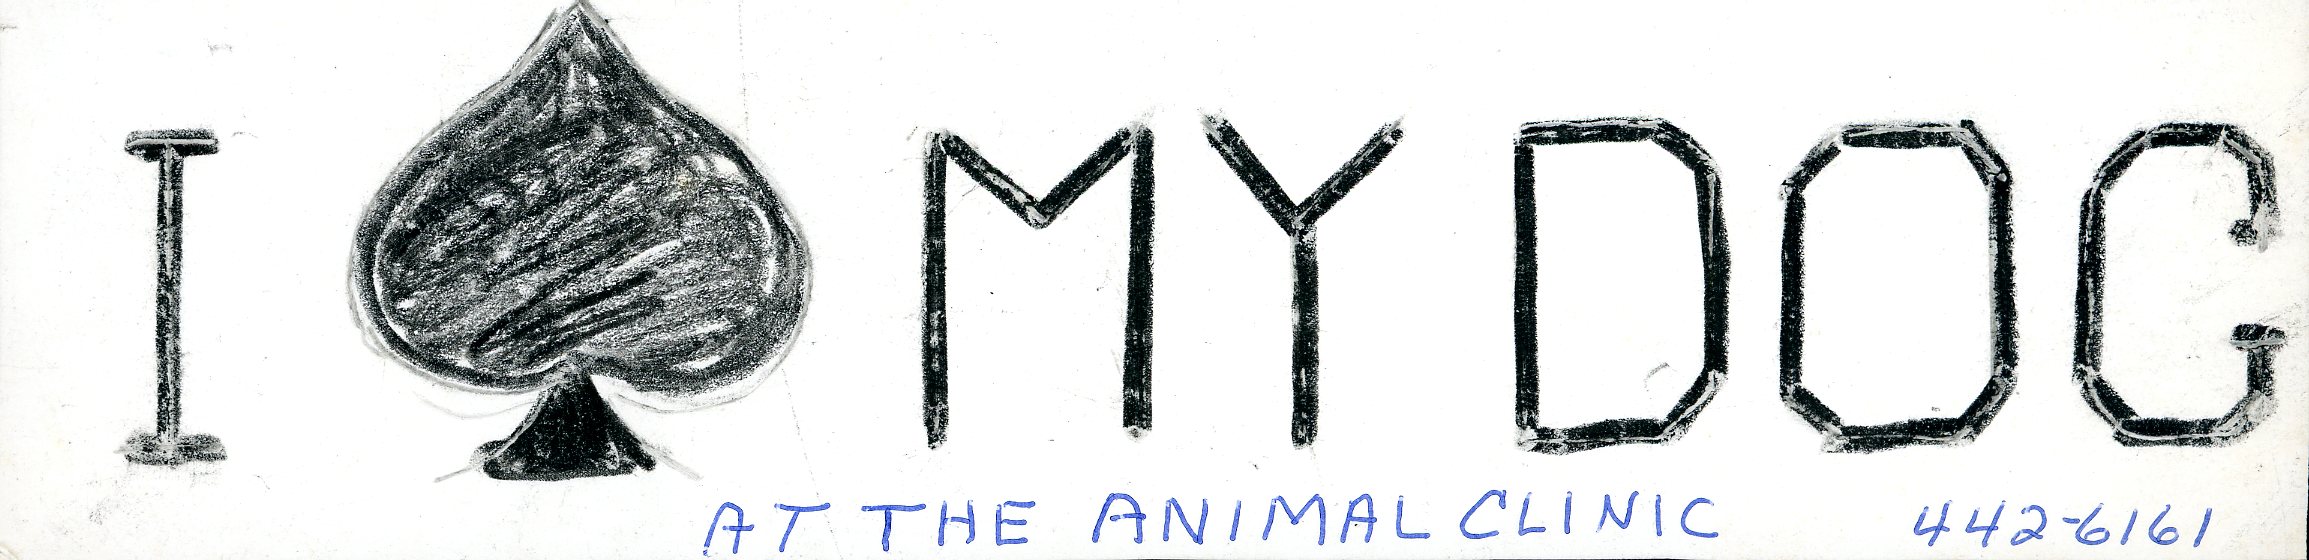 Lieberman’s prototype for “I (Spayed) My Dog” bumper sticker to advertise clinic services.